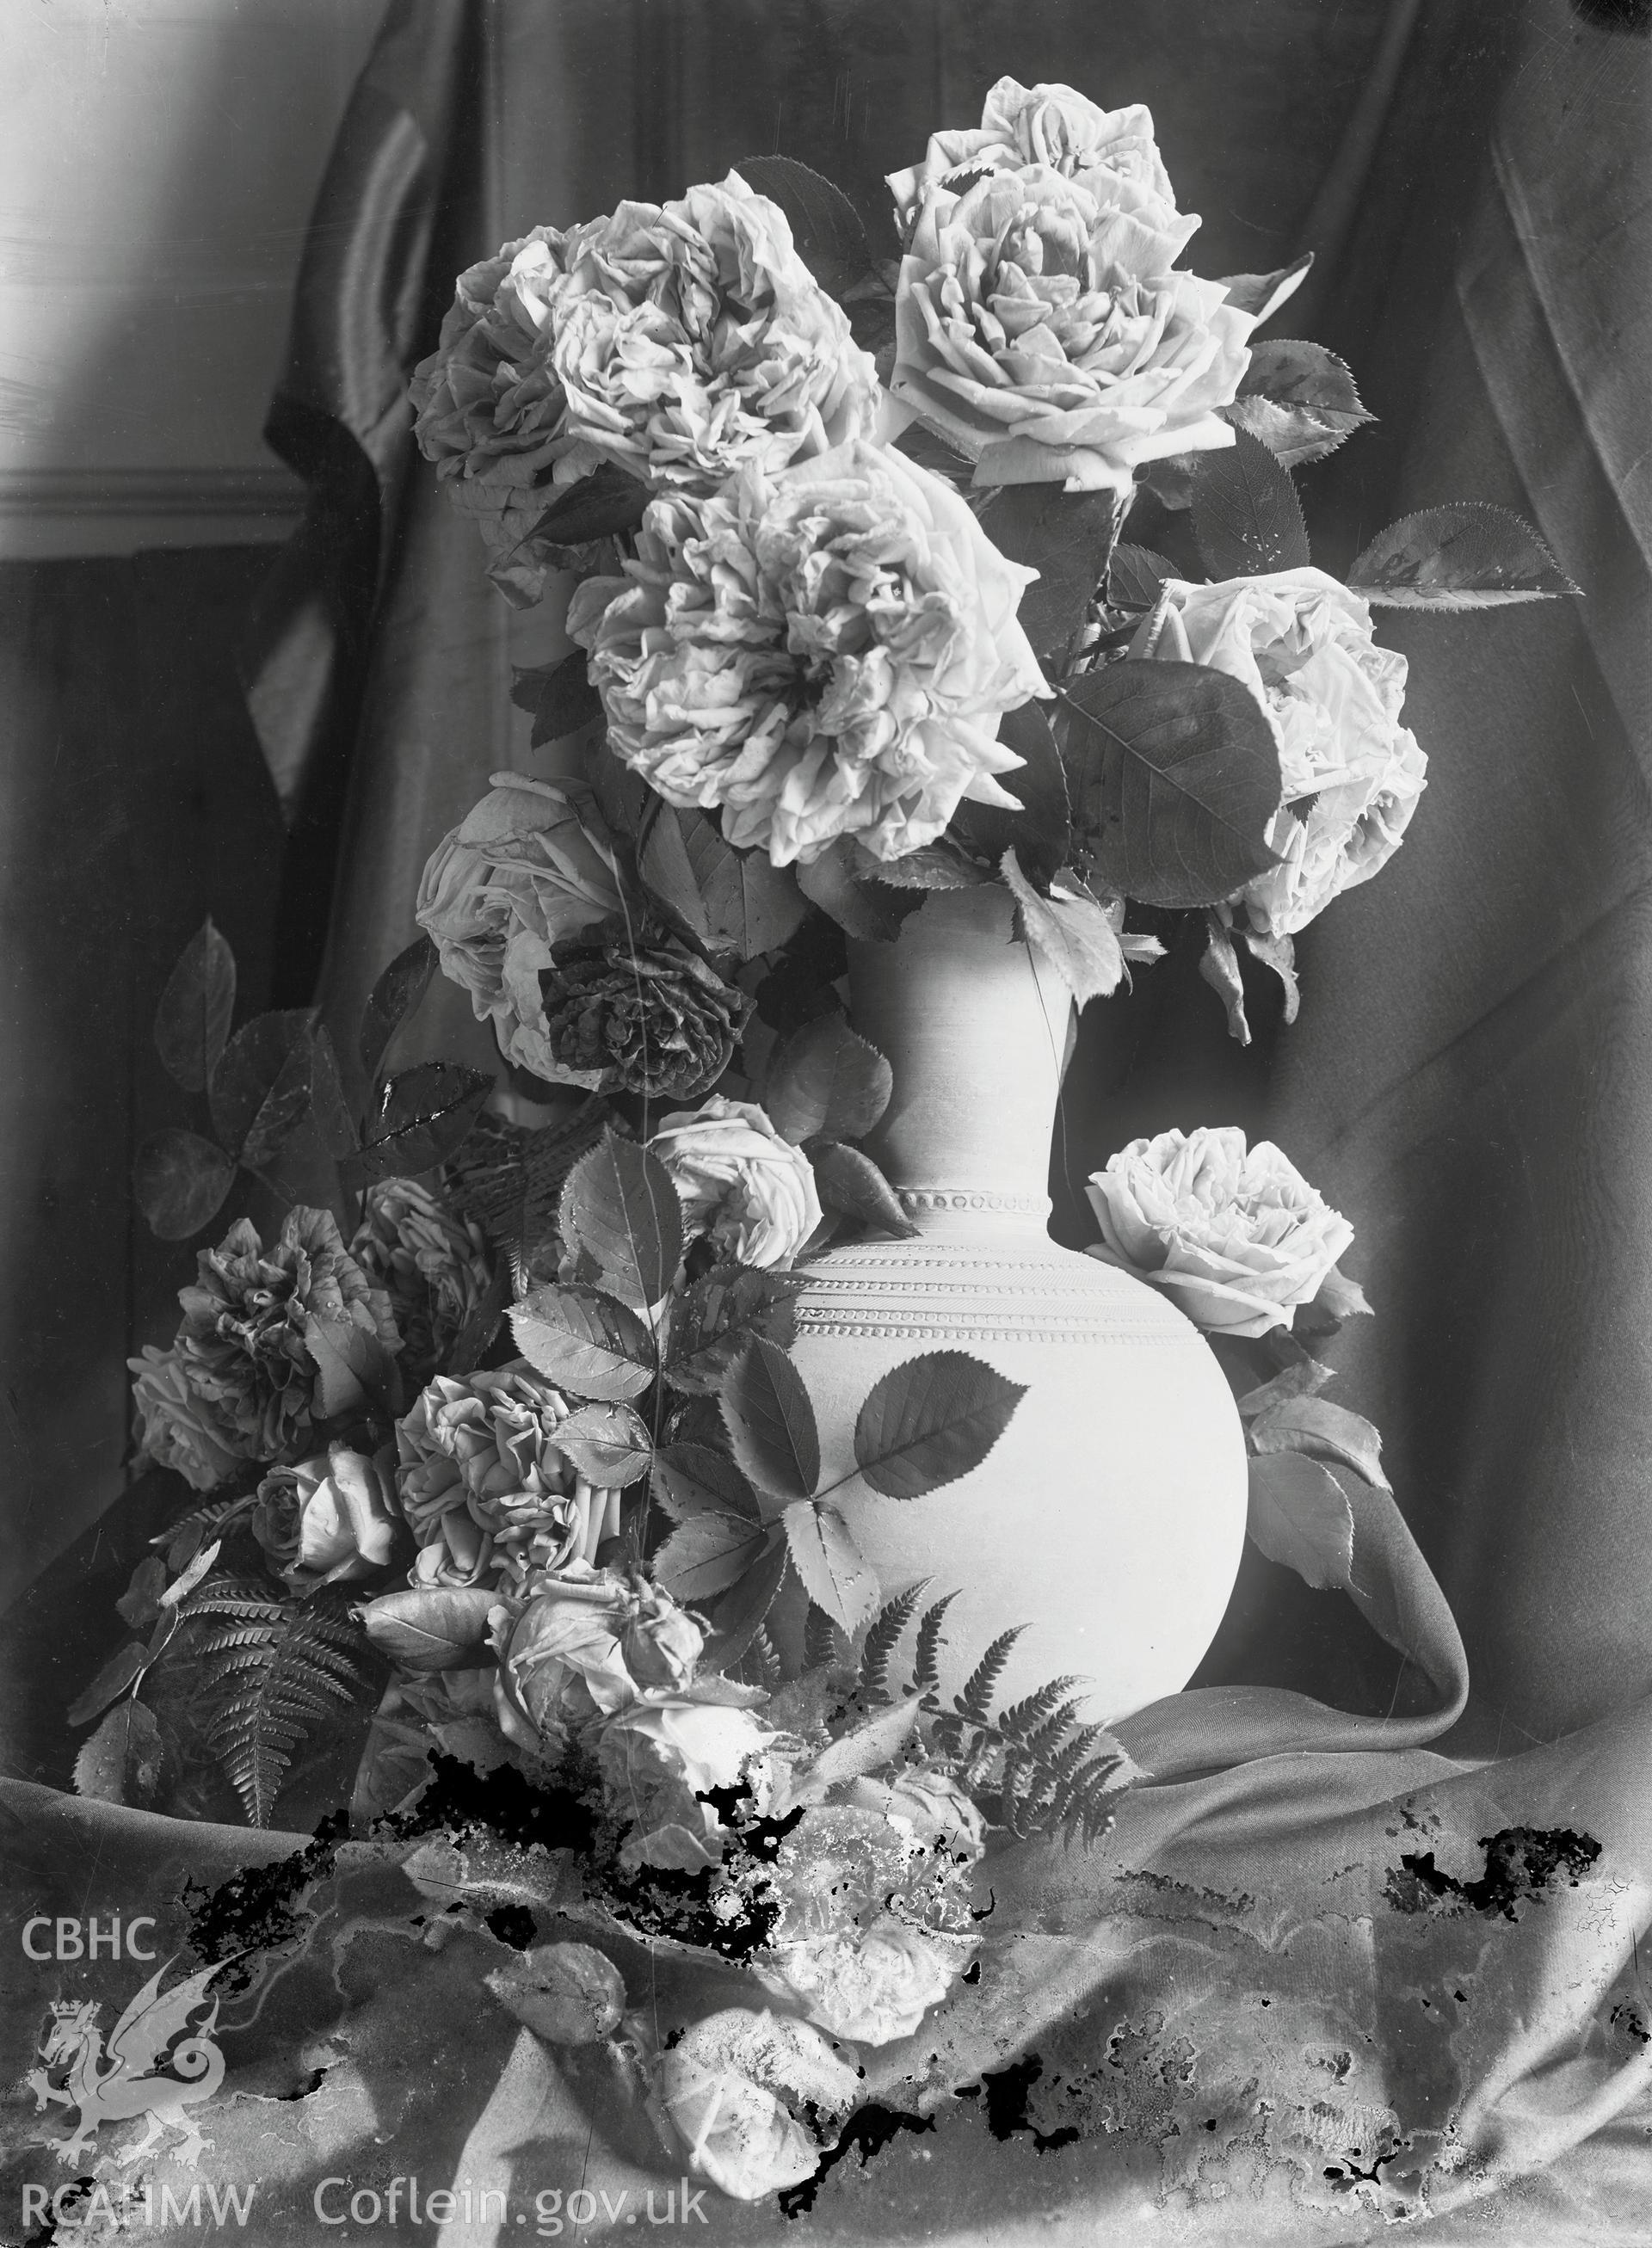 Black and white image dating from c.1910 showing a vase of roses, taken by Emile T. Evans.